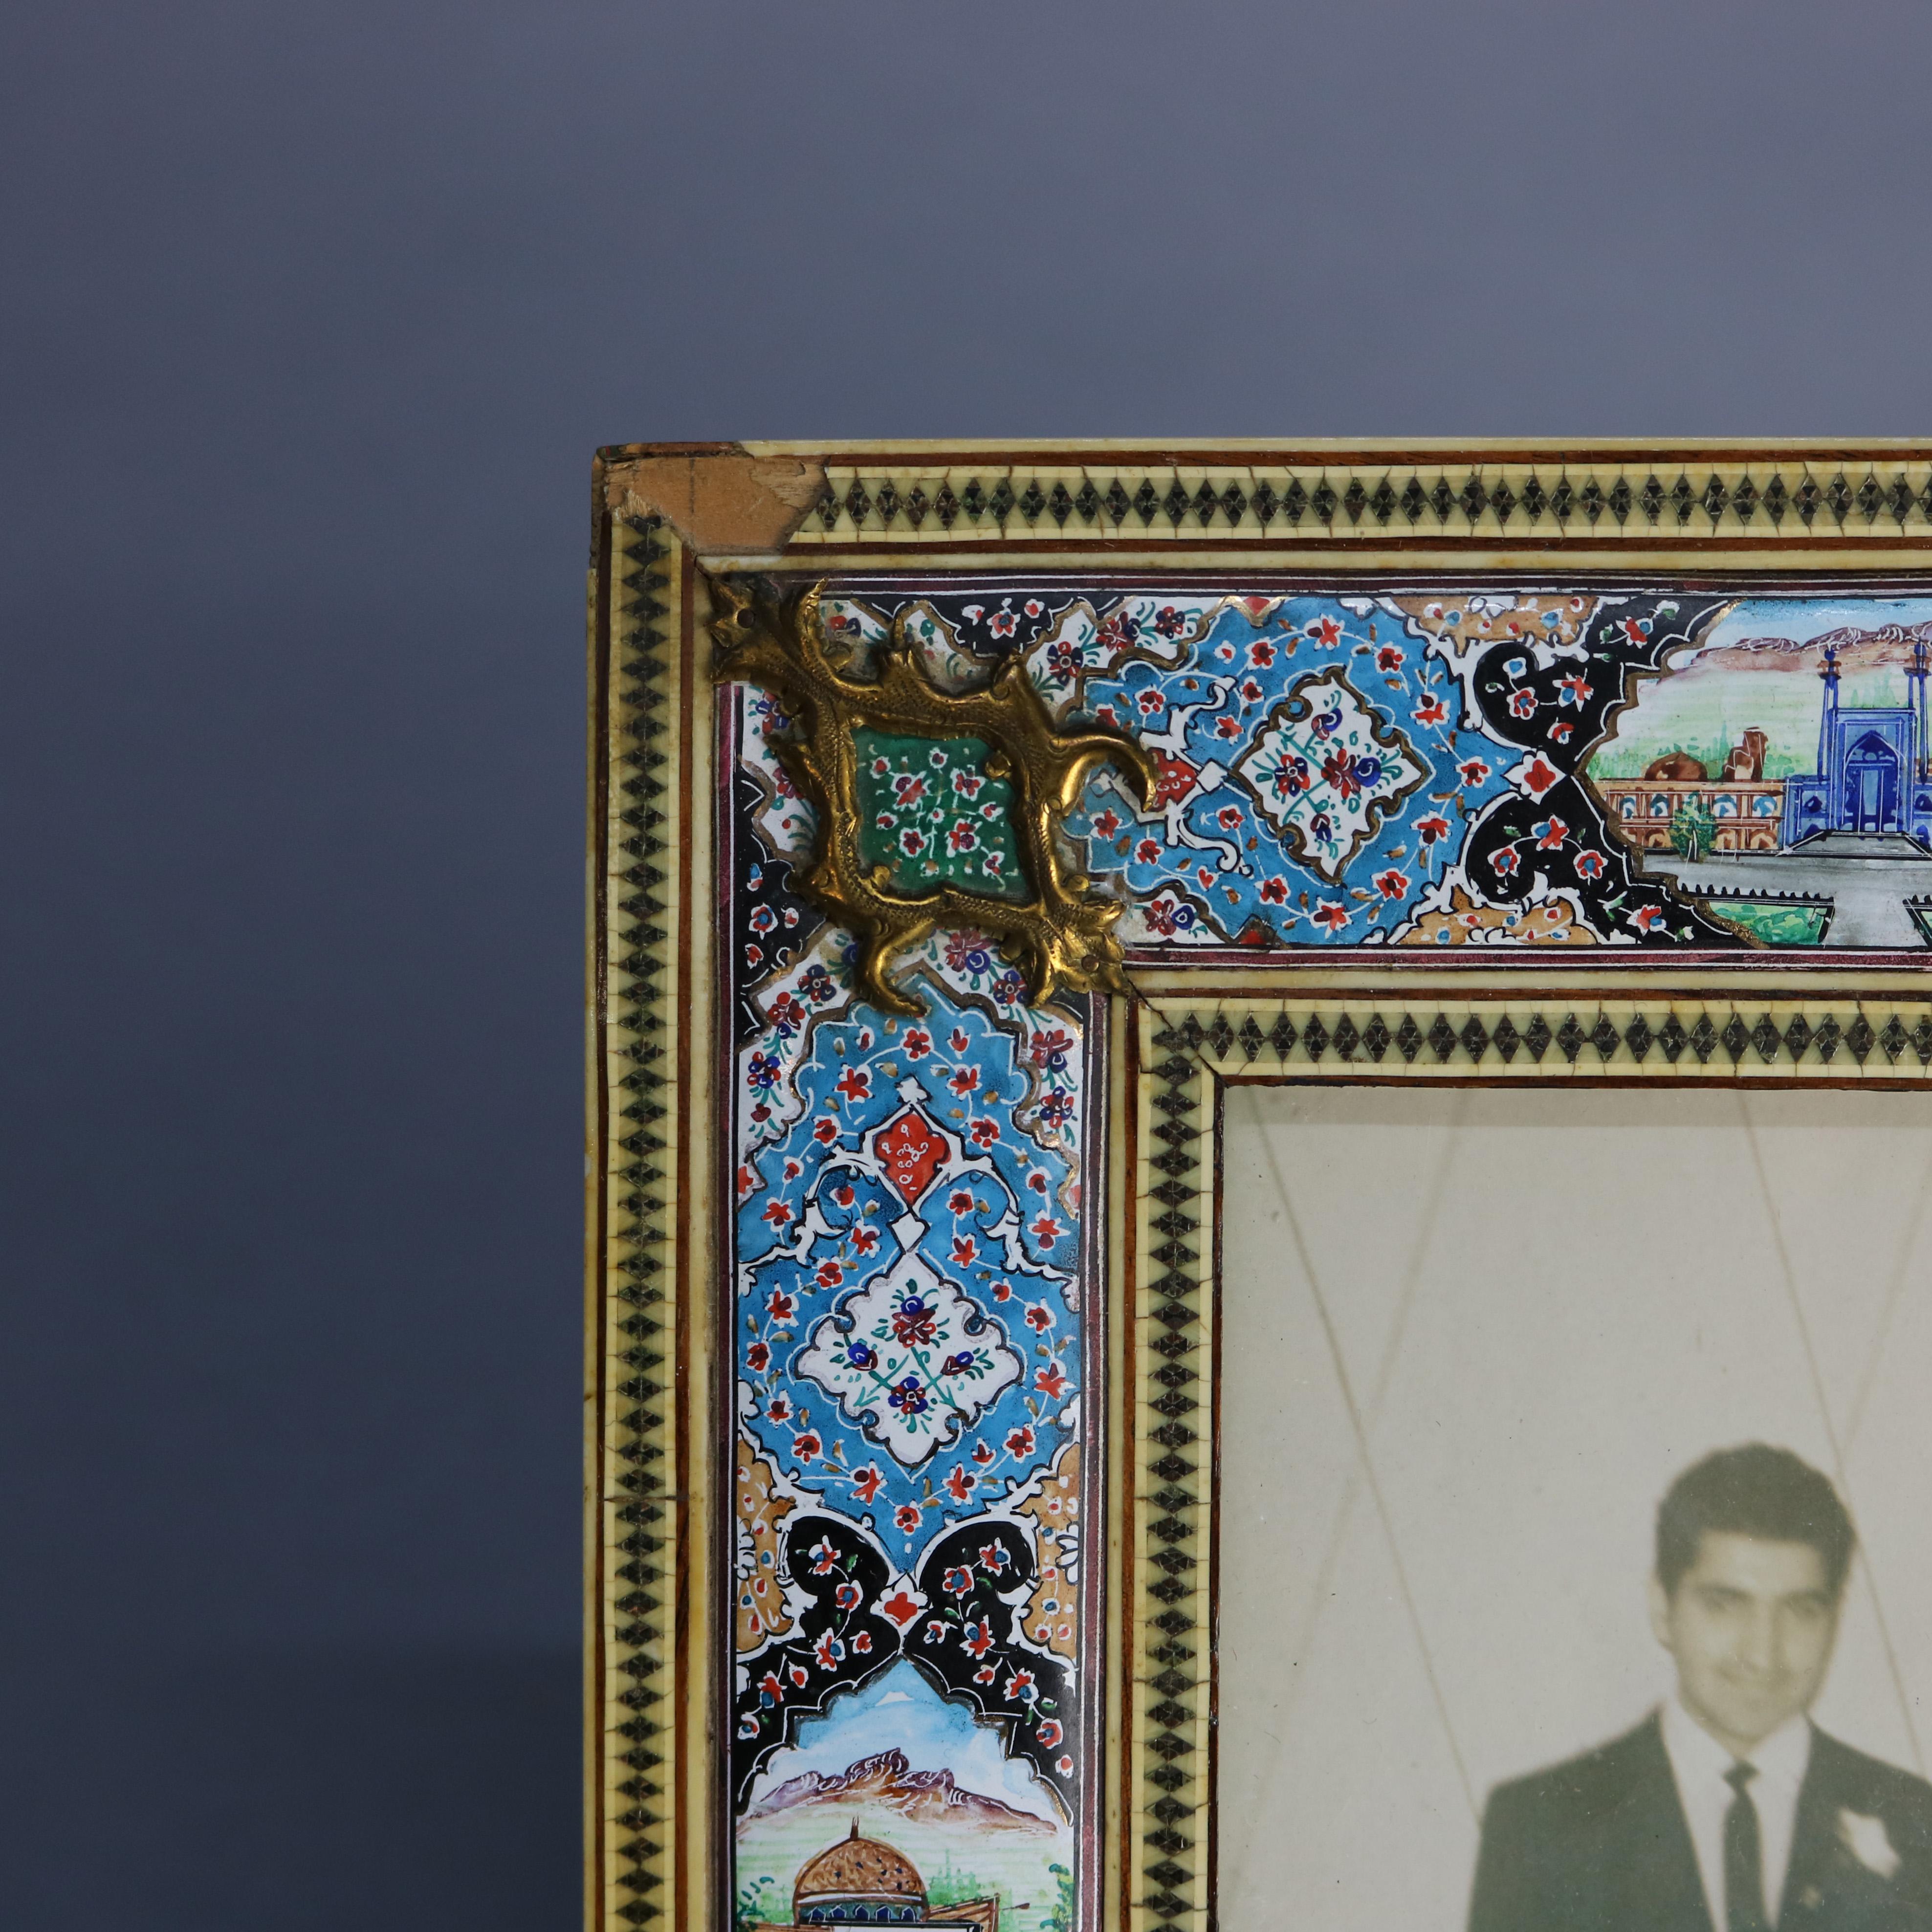 An antique Persian pictorial picture frame offers giltwood casing with enamel on copper mosaic design with hand painted cityscape reserves, 19th century

Measures: 11.25